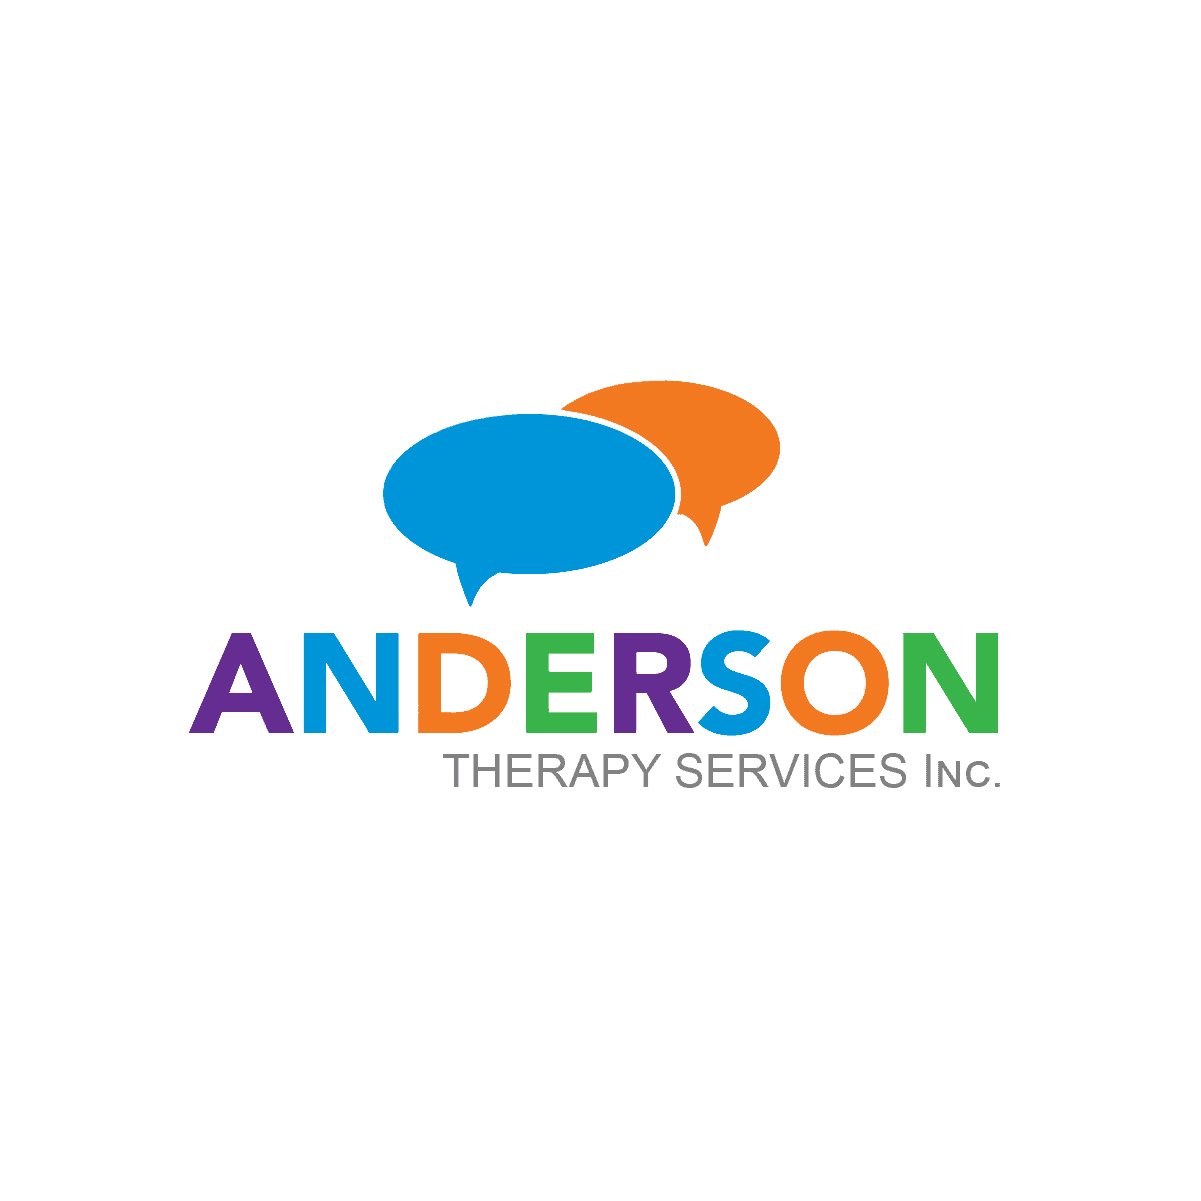 Anderson Therapy Services Inc. Logo-100.jpg